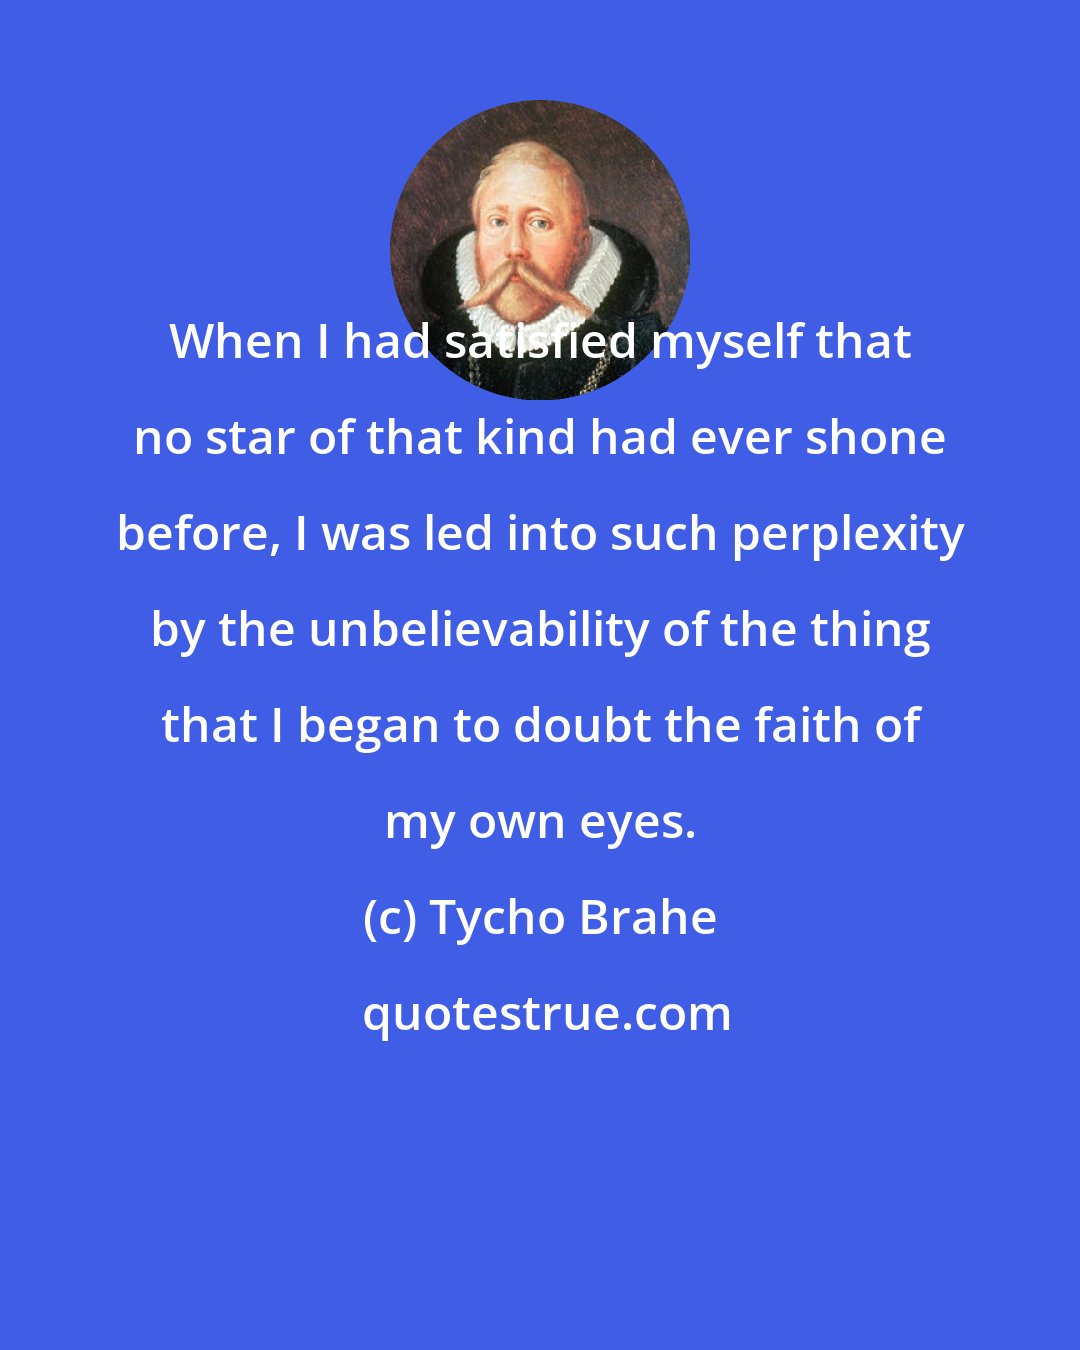 Tycho Brahe: When I had satisfied myself that no star of that kind had ever shone before, I was led into such perplexity by the unbelievability of the thing that I began to doubt the faith of my own eyes.